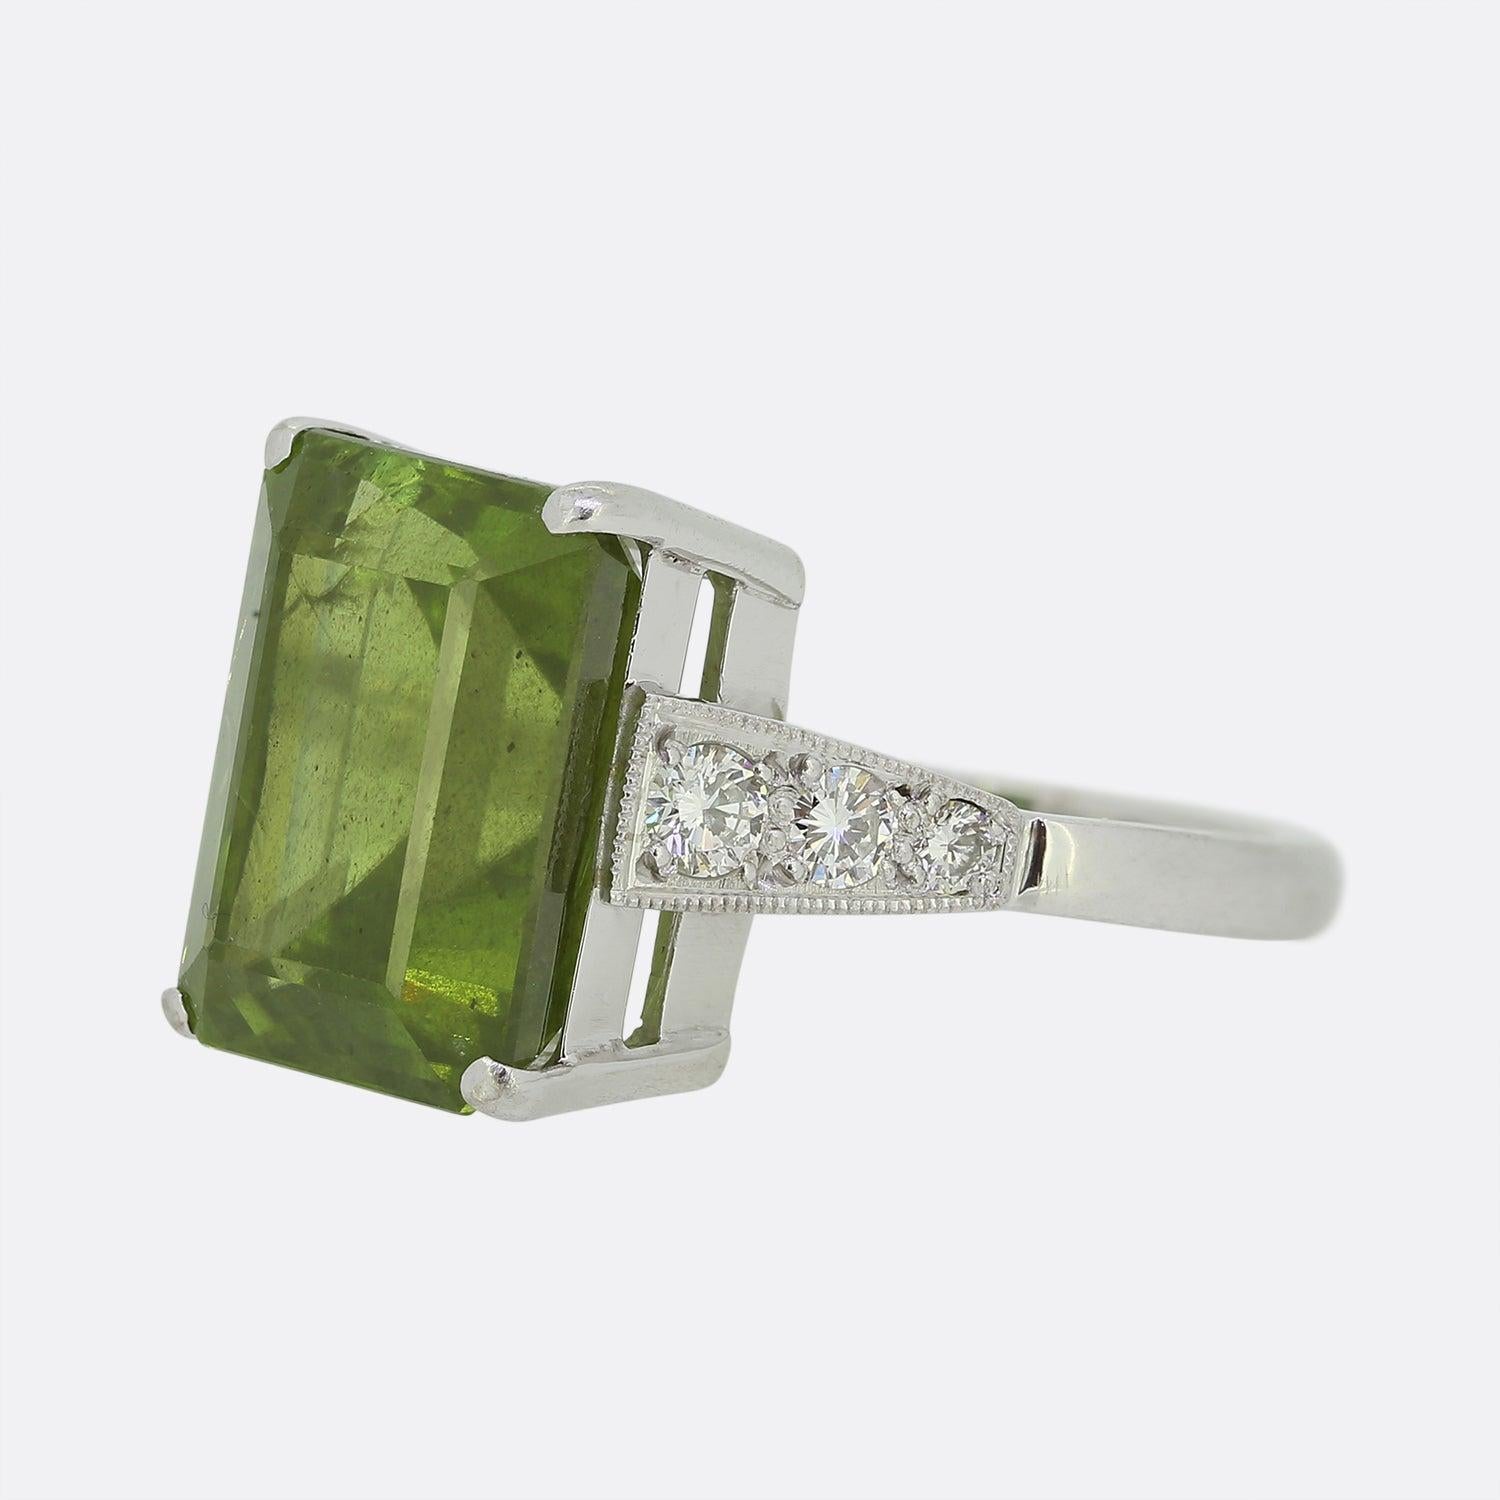 Here we have an 18ct white gold peridot and diamond cocktail ring. The centre stone is a large rectangular shaped peridot possessing an intense dark green hue. This focal gemstone is flanked on either shoulder by a trio of milgrain set round